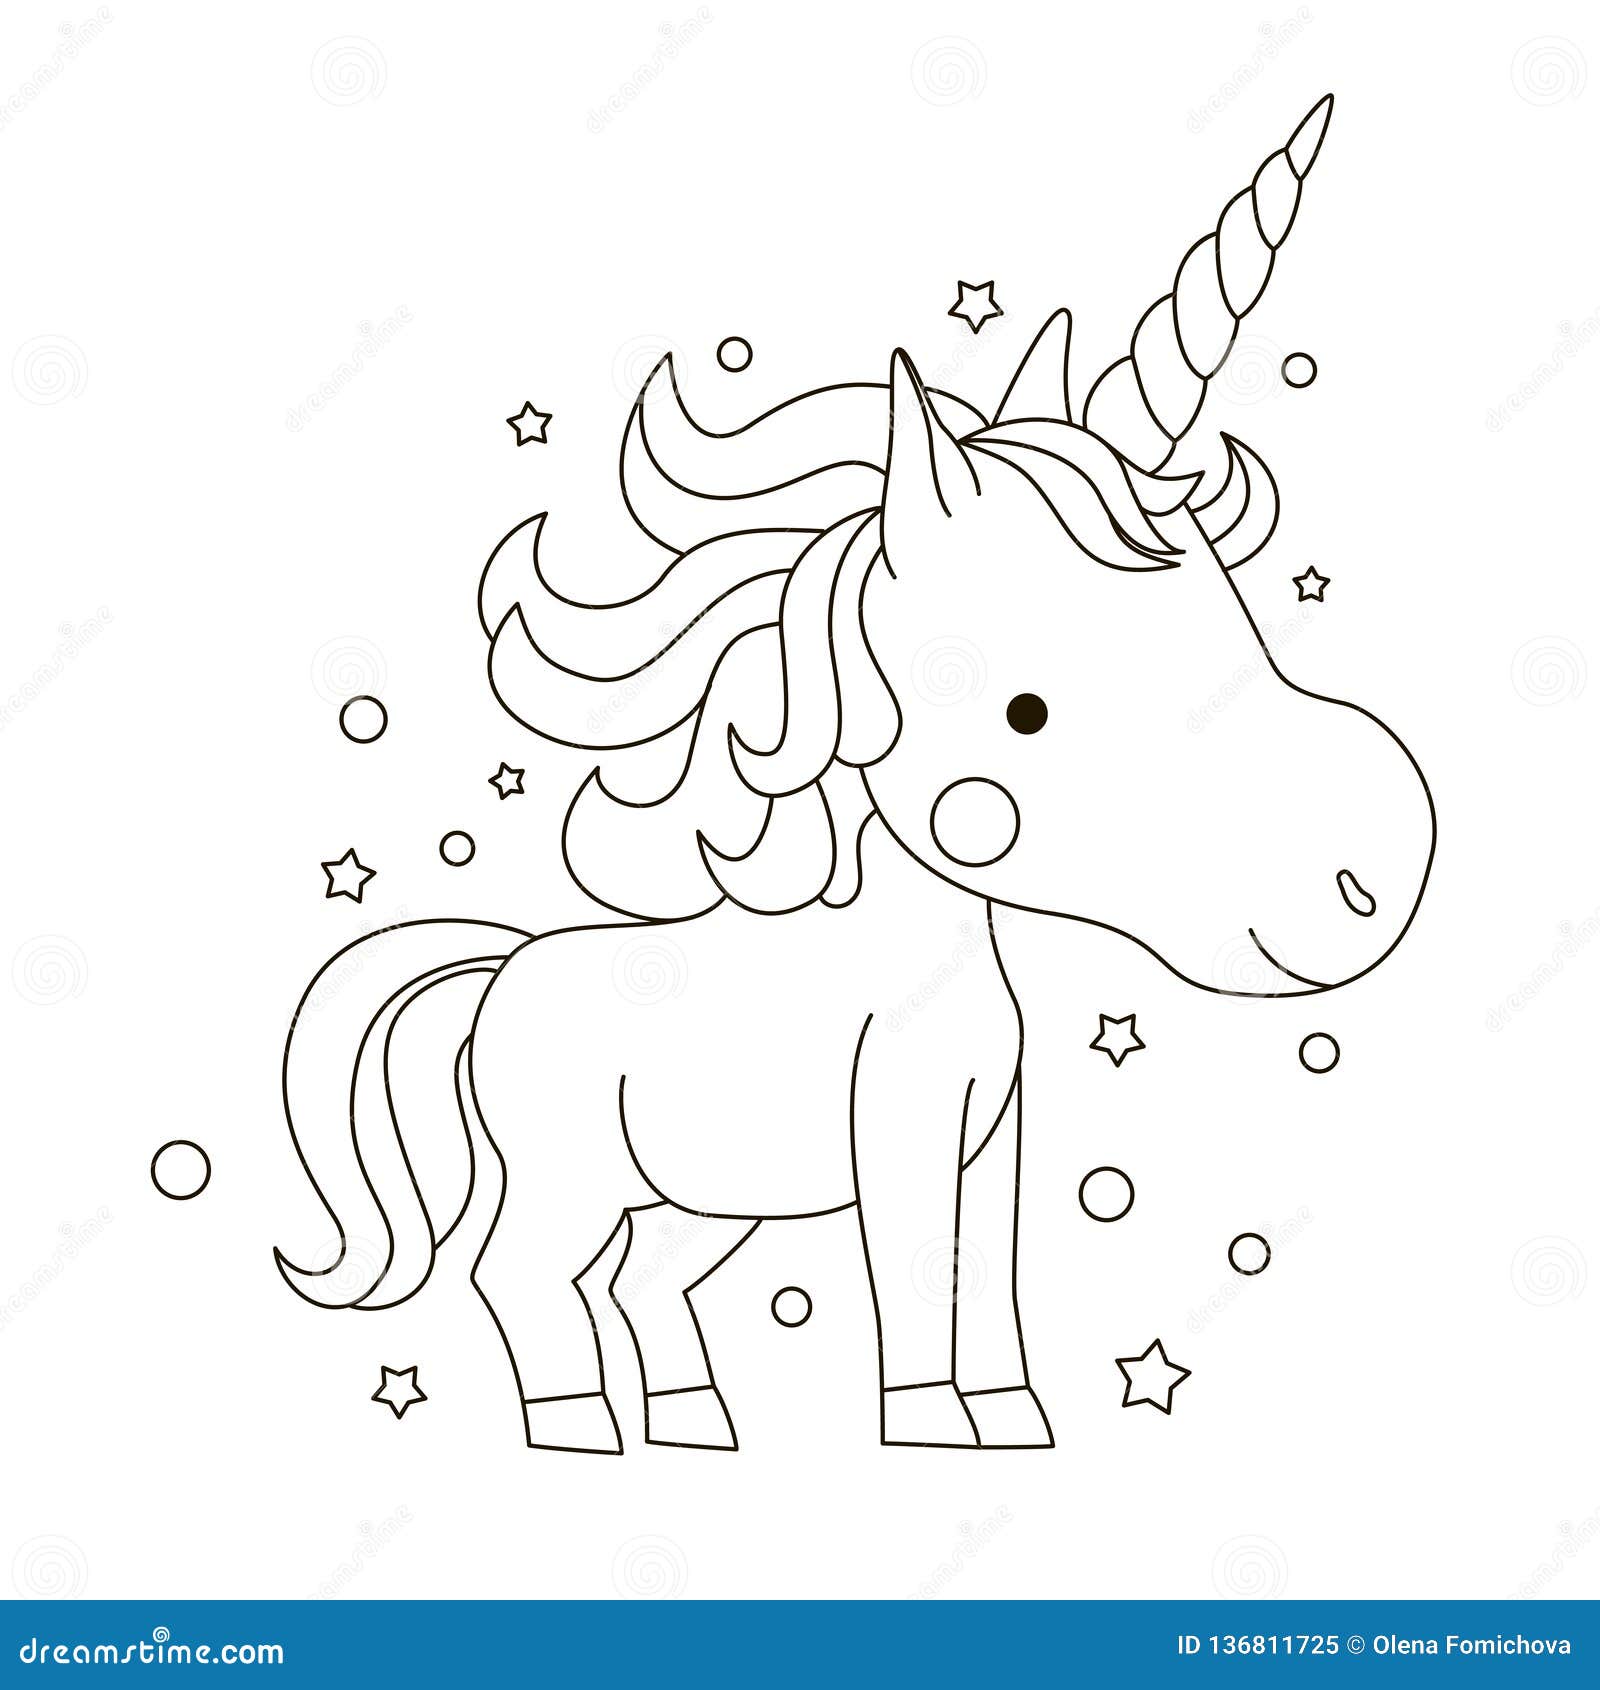 Sketch of a Cute Smiling Unicorn for Coloring on a White Background ...